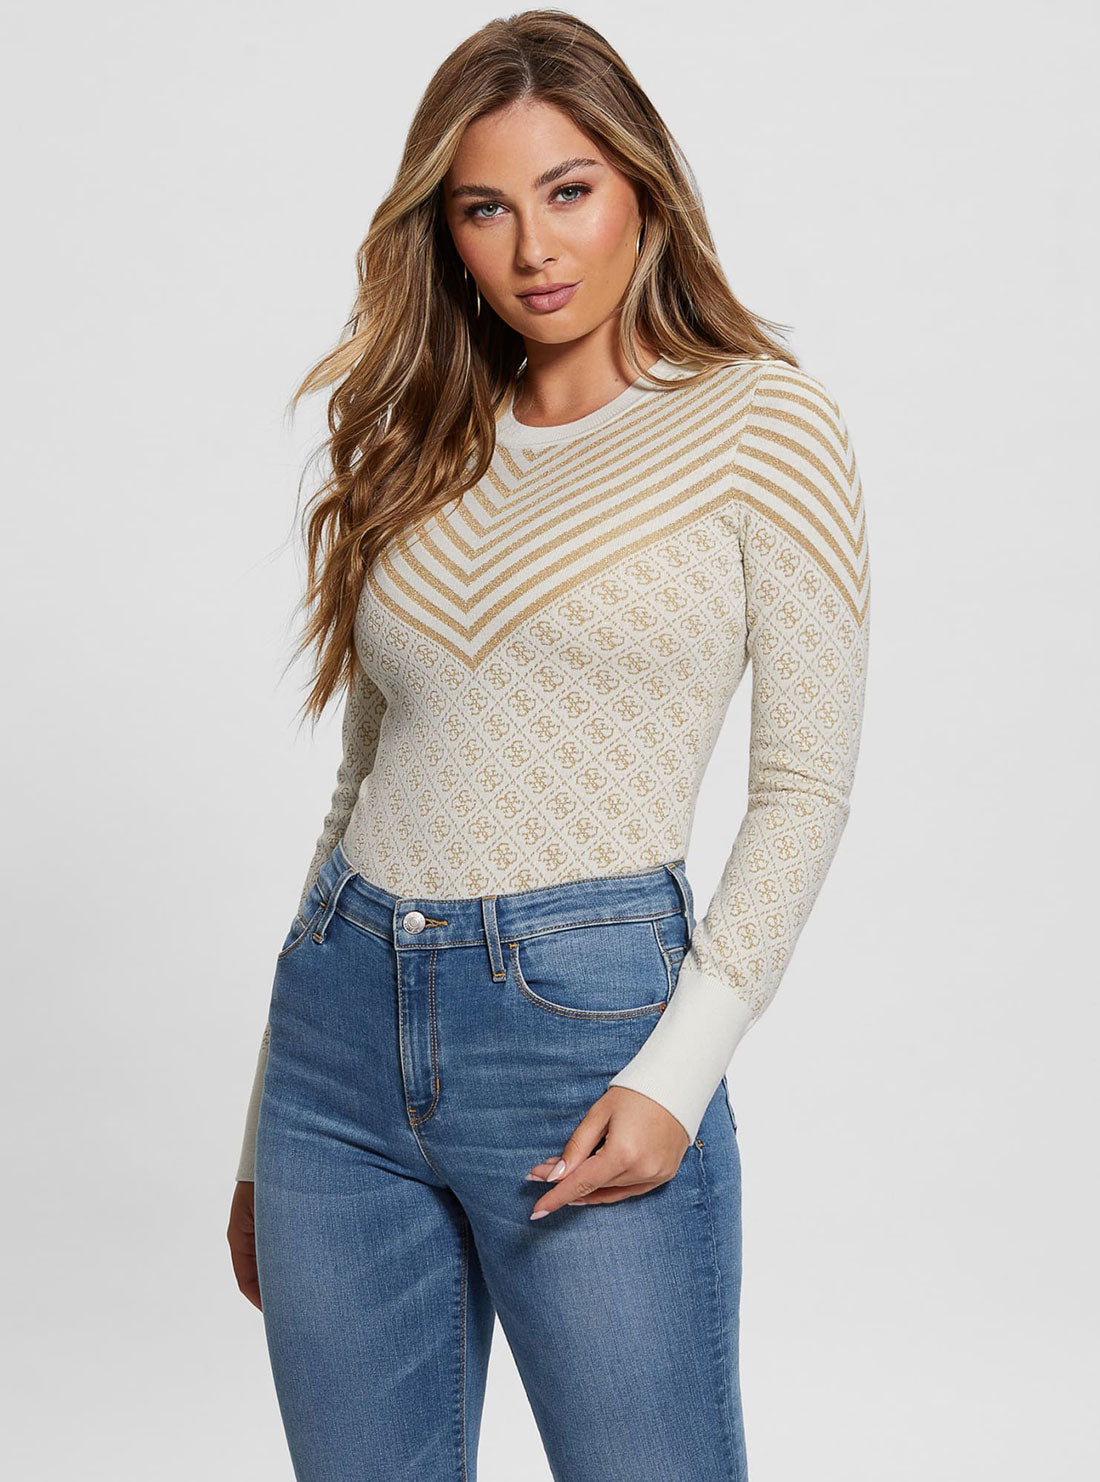 Cream White Renee Logo Knit Top | GUESS Women's Apparel | front view